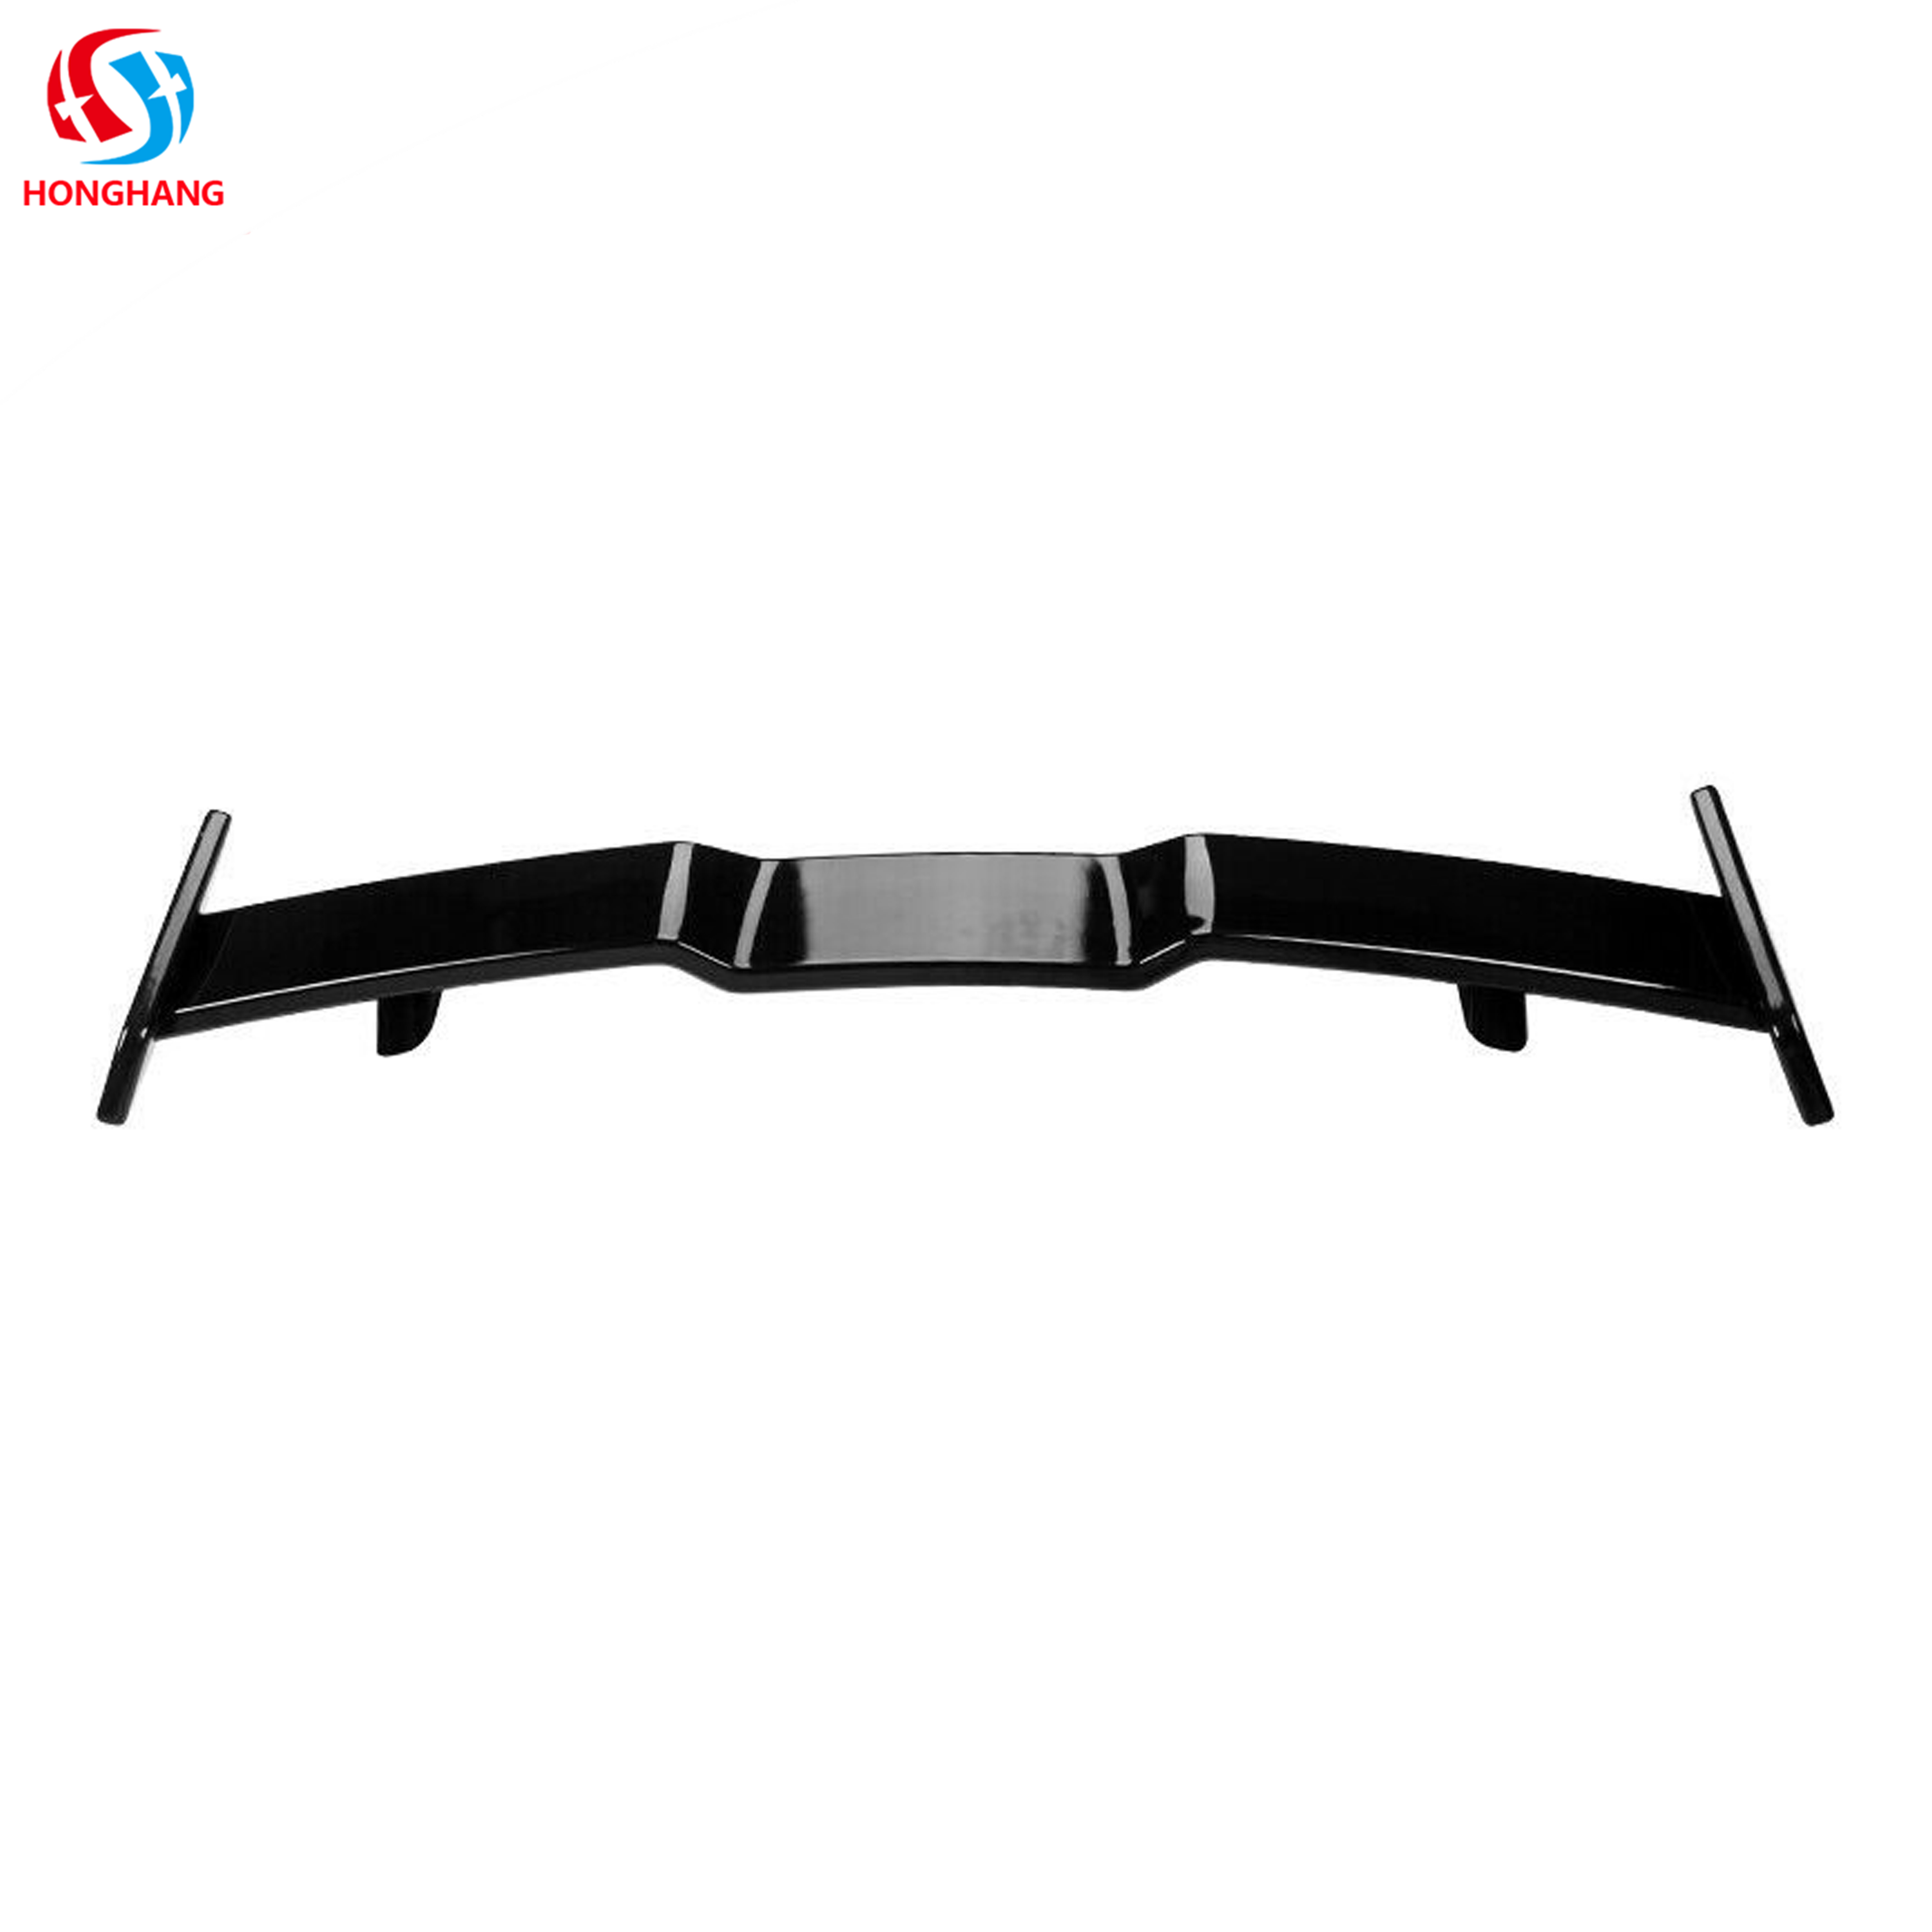 Toyota Camry TRD Style Rear Spoiler 2018-2020 